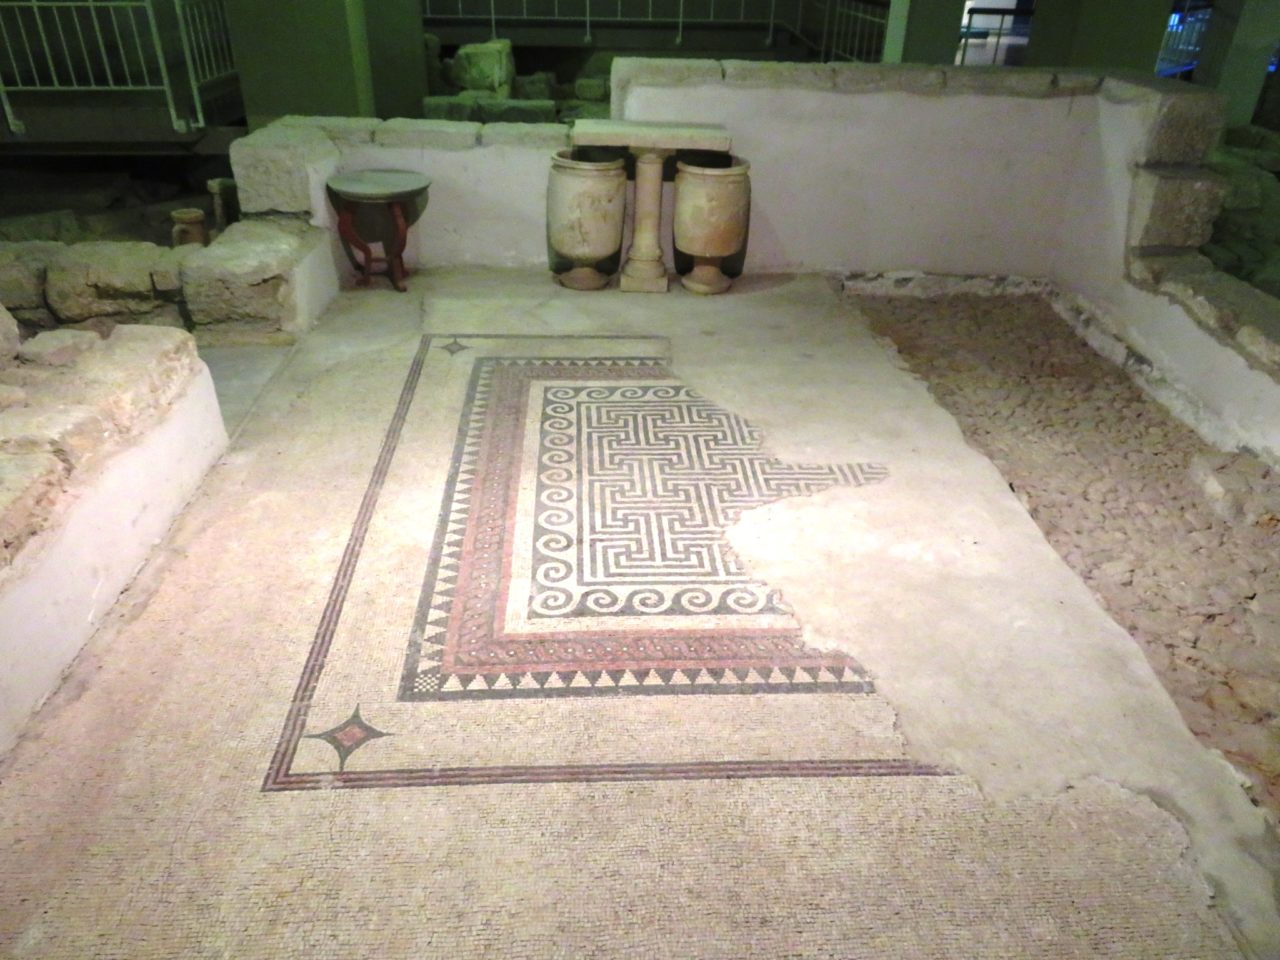 The joys of walking Jerusalem - a Herodian Mansion floor from 2,000 years ago